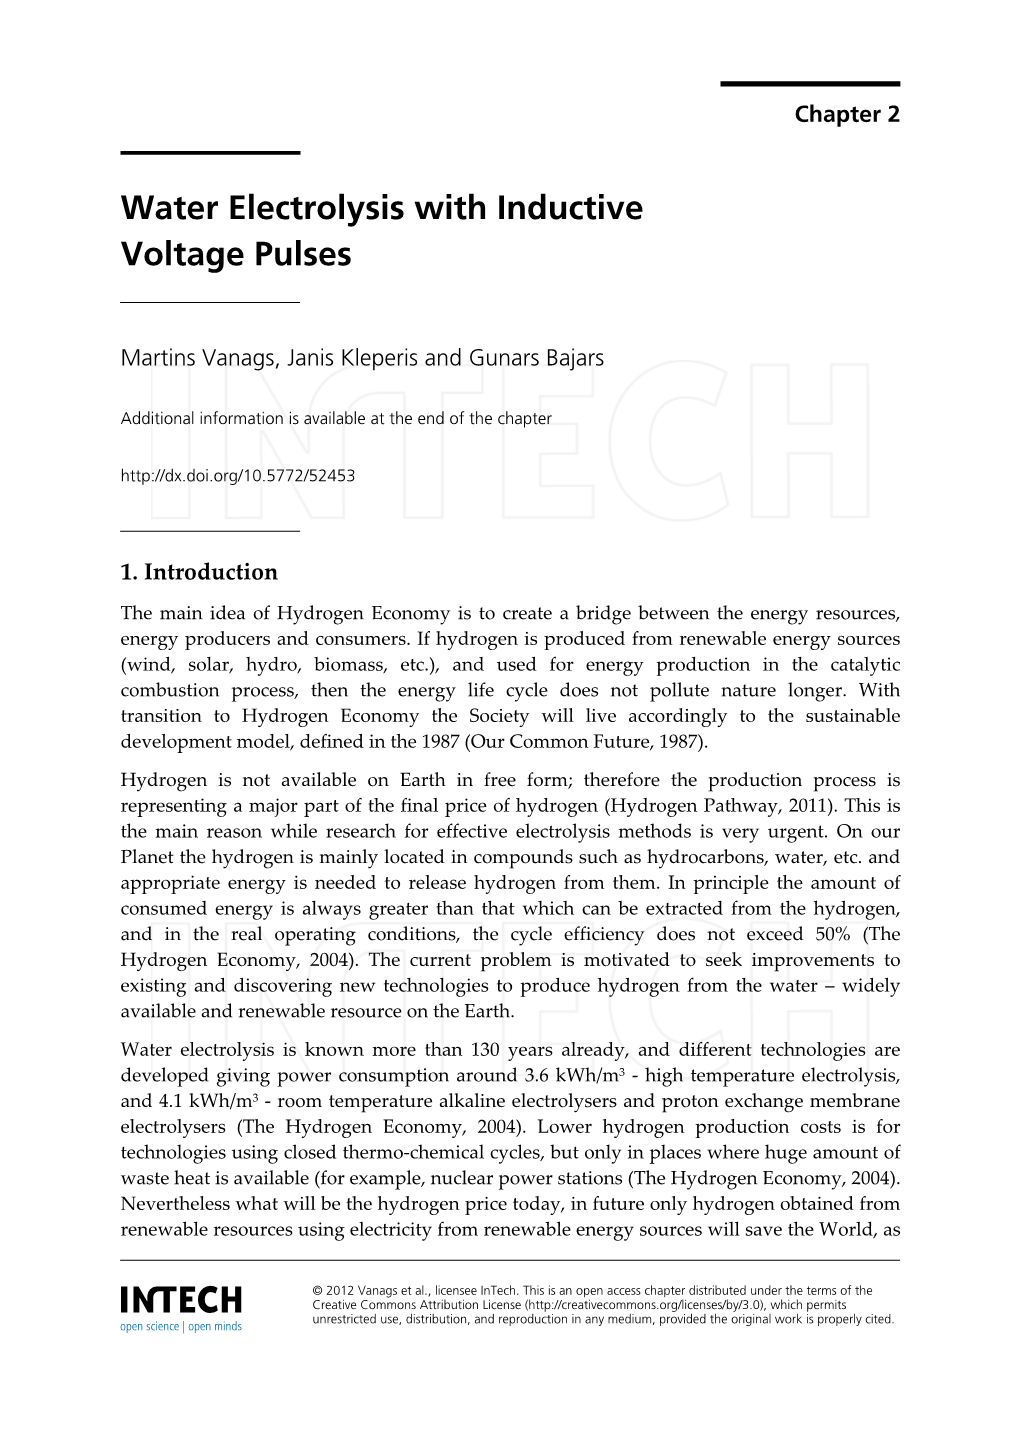 Water Electrolysis with Inductive Voltage Pulses